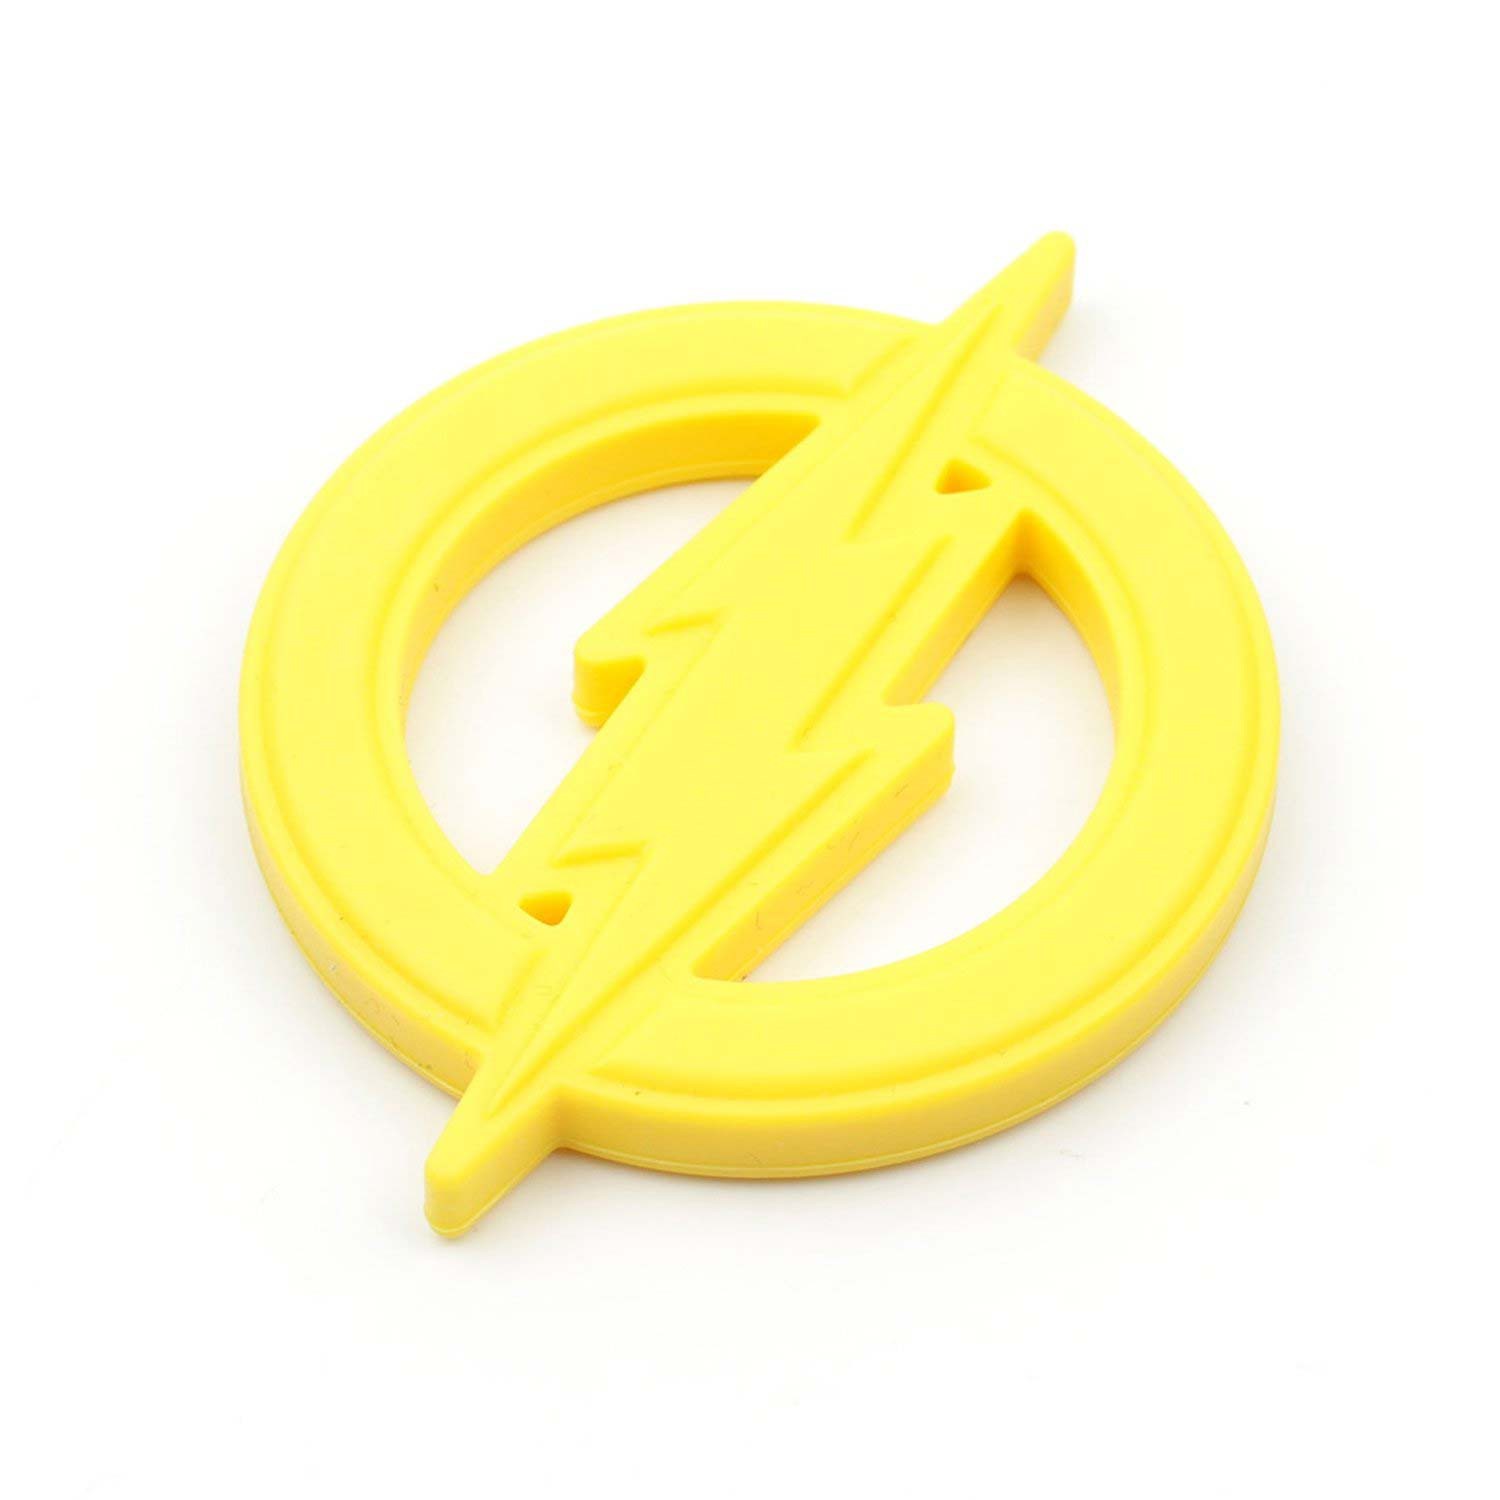 The Flash Yellow Infant Baby Teether